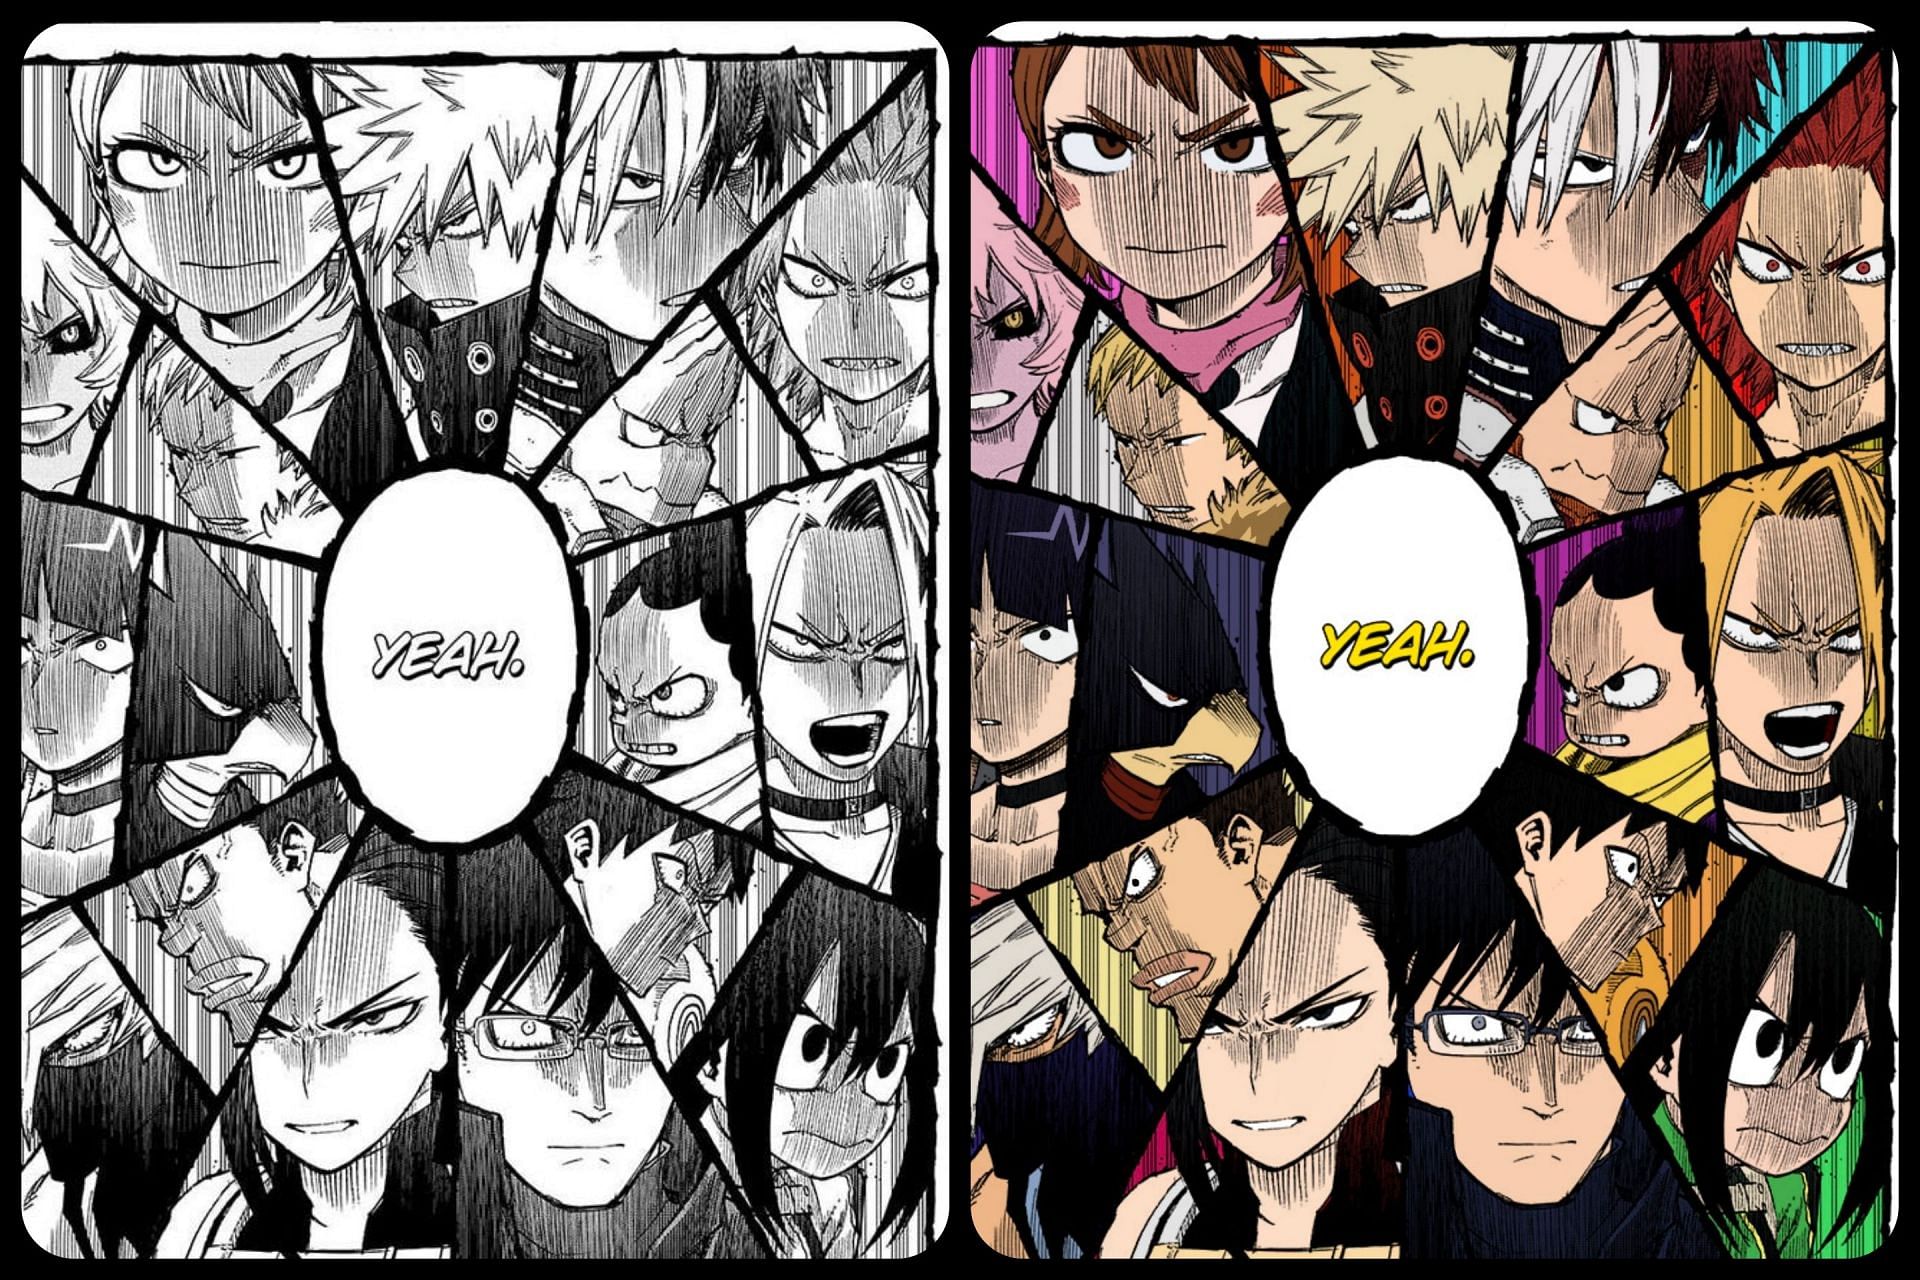 Class 1-A in chapter 338 (Image Via Shounen Jump, Coloring by CCMac_Arts)